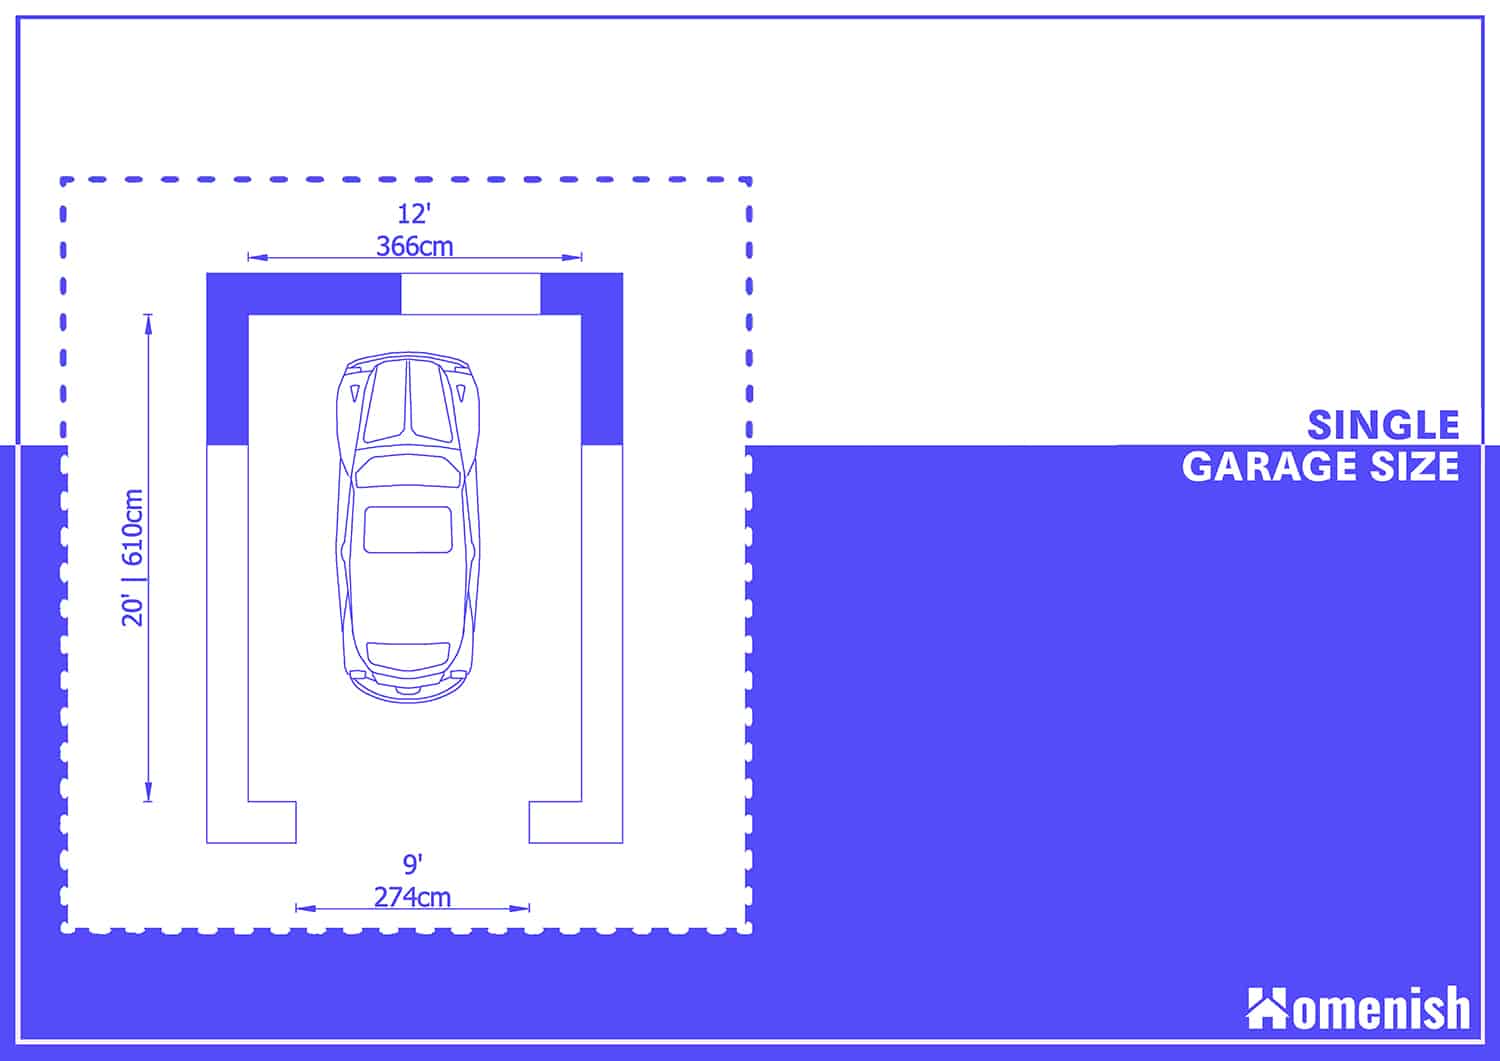 Standard Garage Dimensions 8 Layouts, What Is The Standard Garage Size For 2 Cars